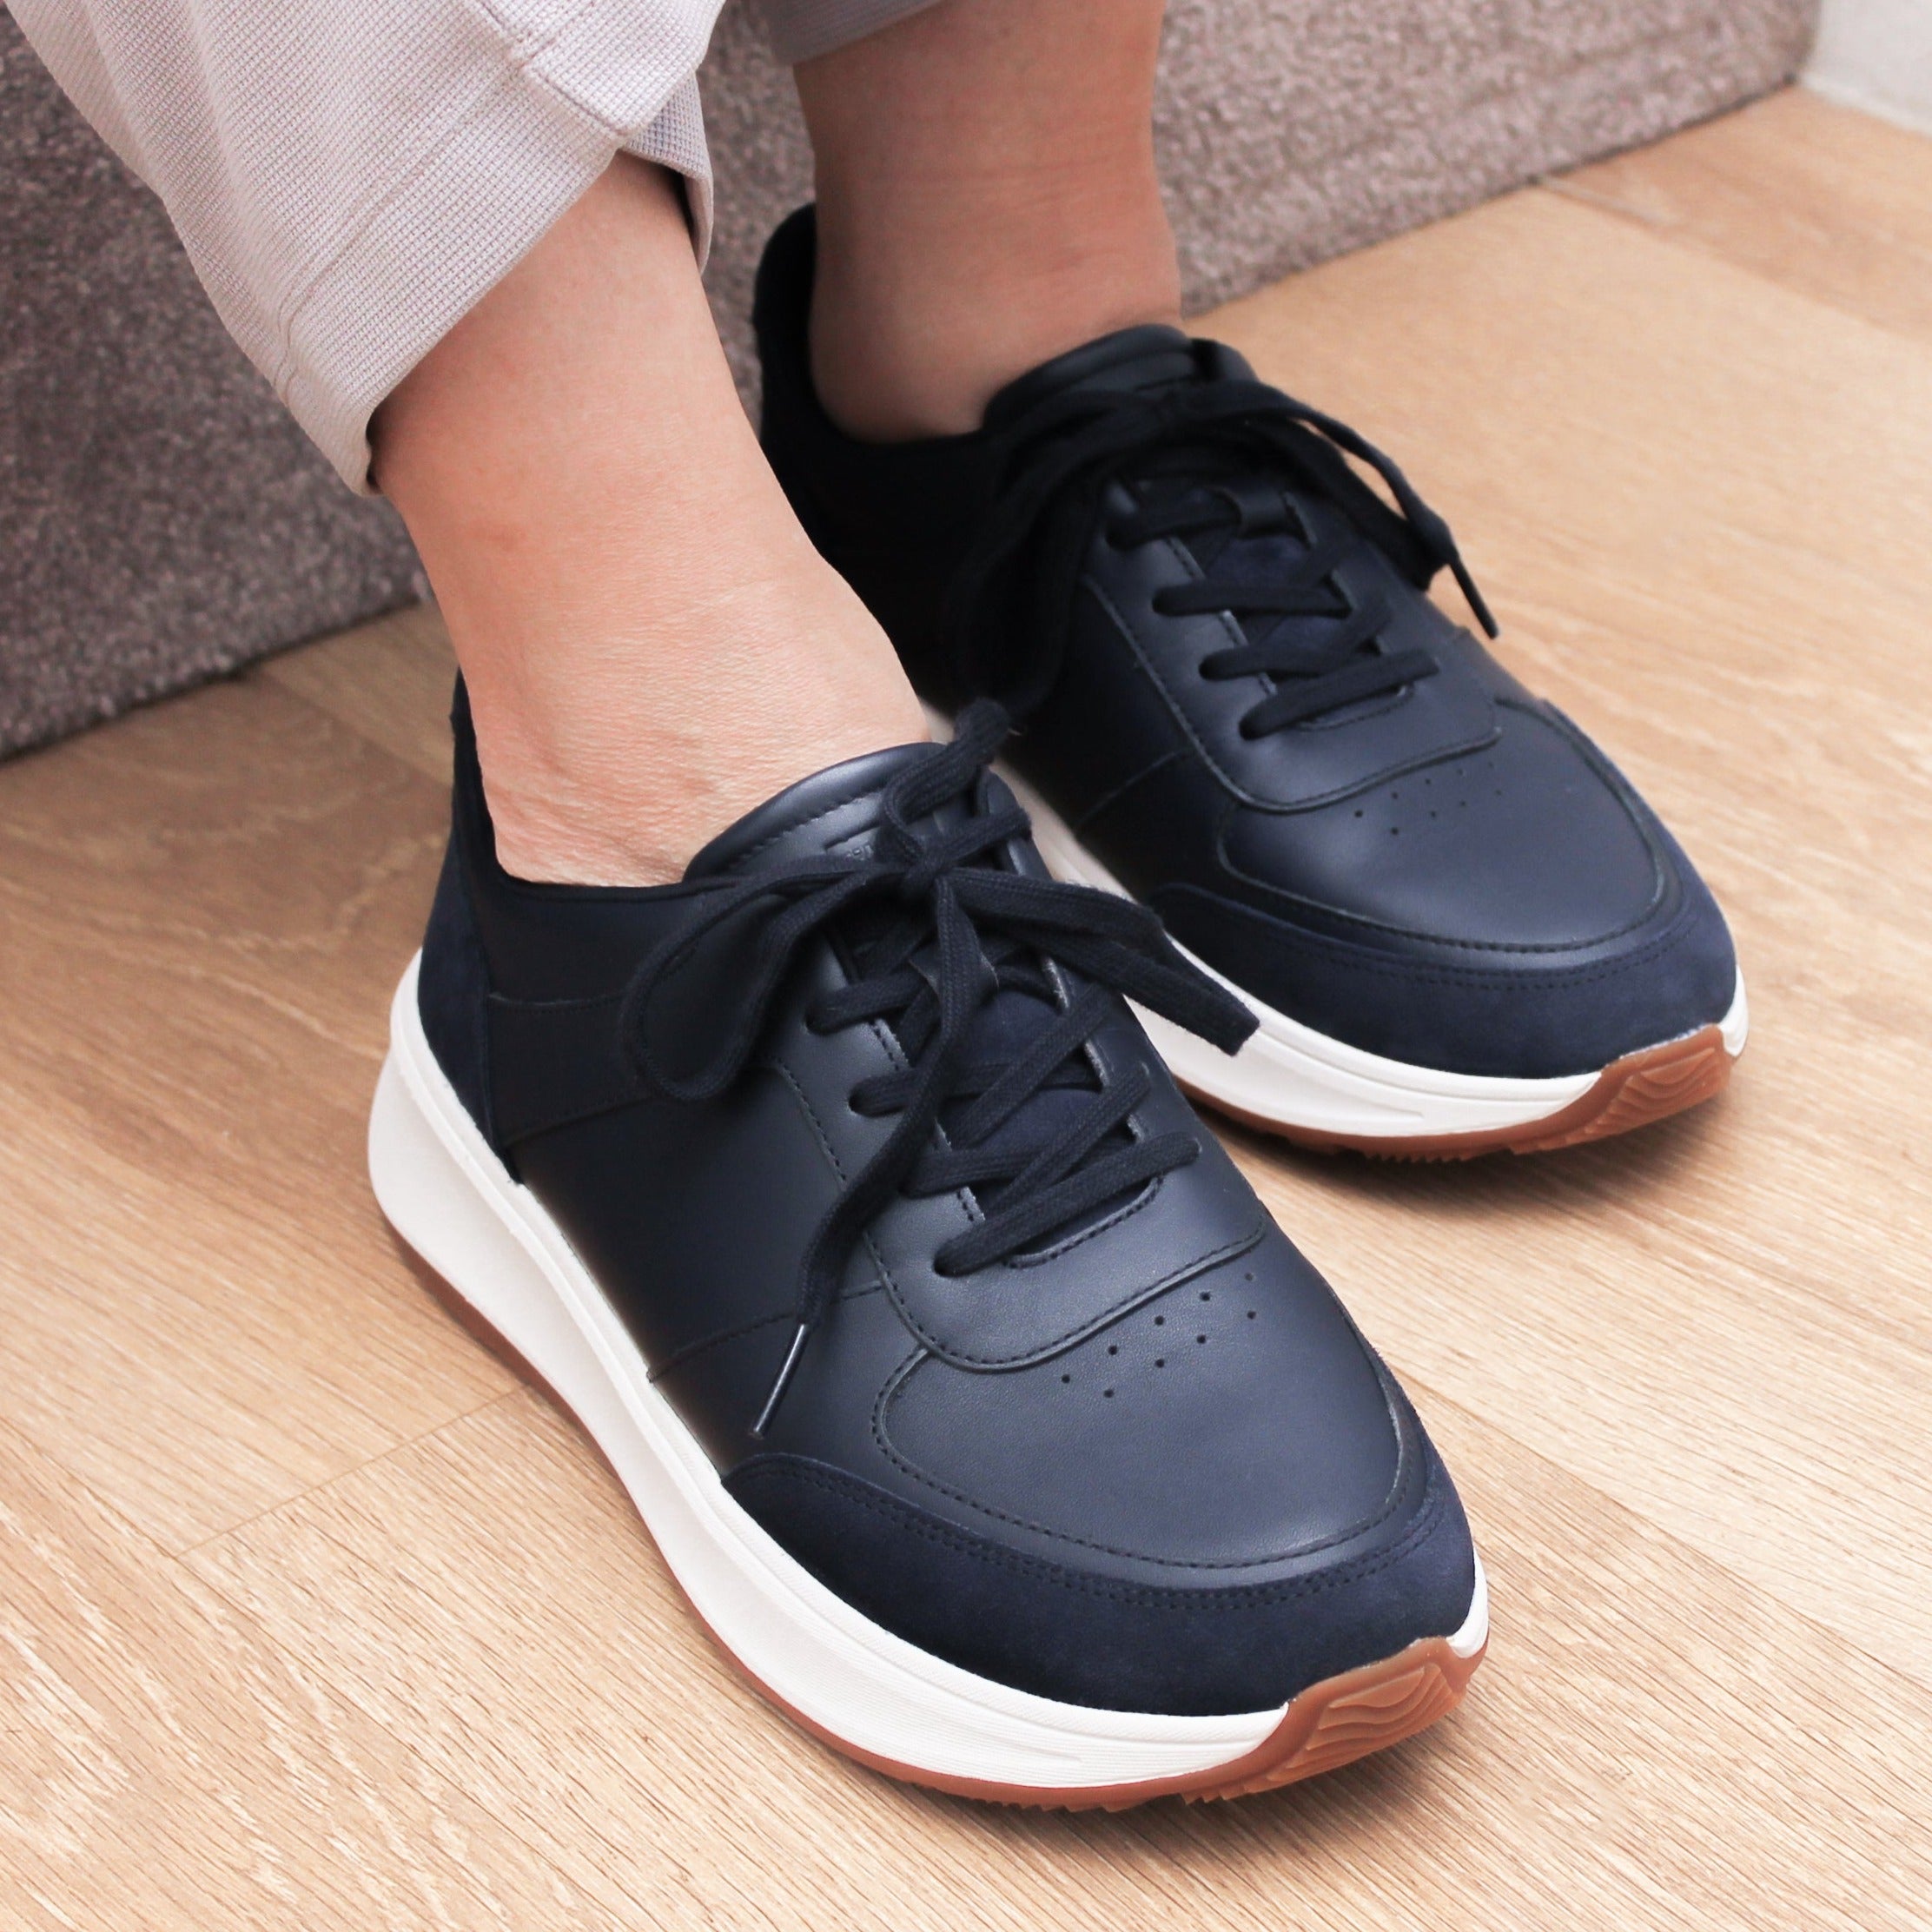 Fitflop F-Mode Leather/Suede Flatform Midnight Navy Sneakers FR1-399